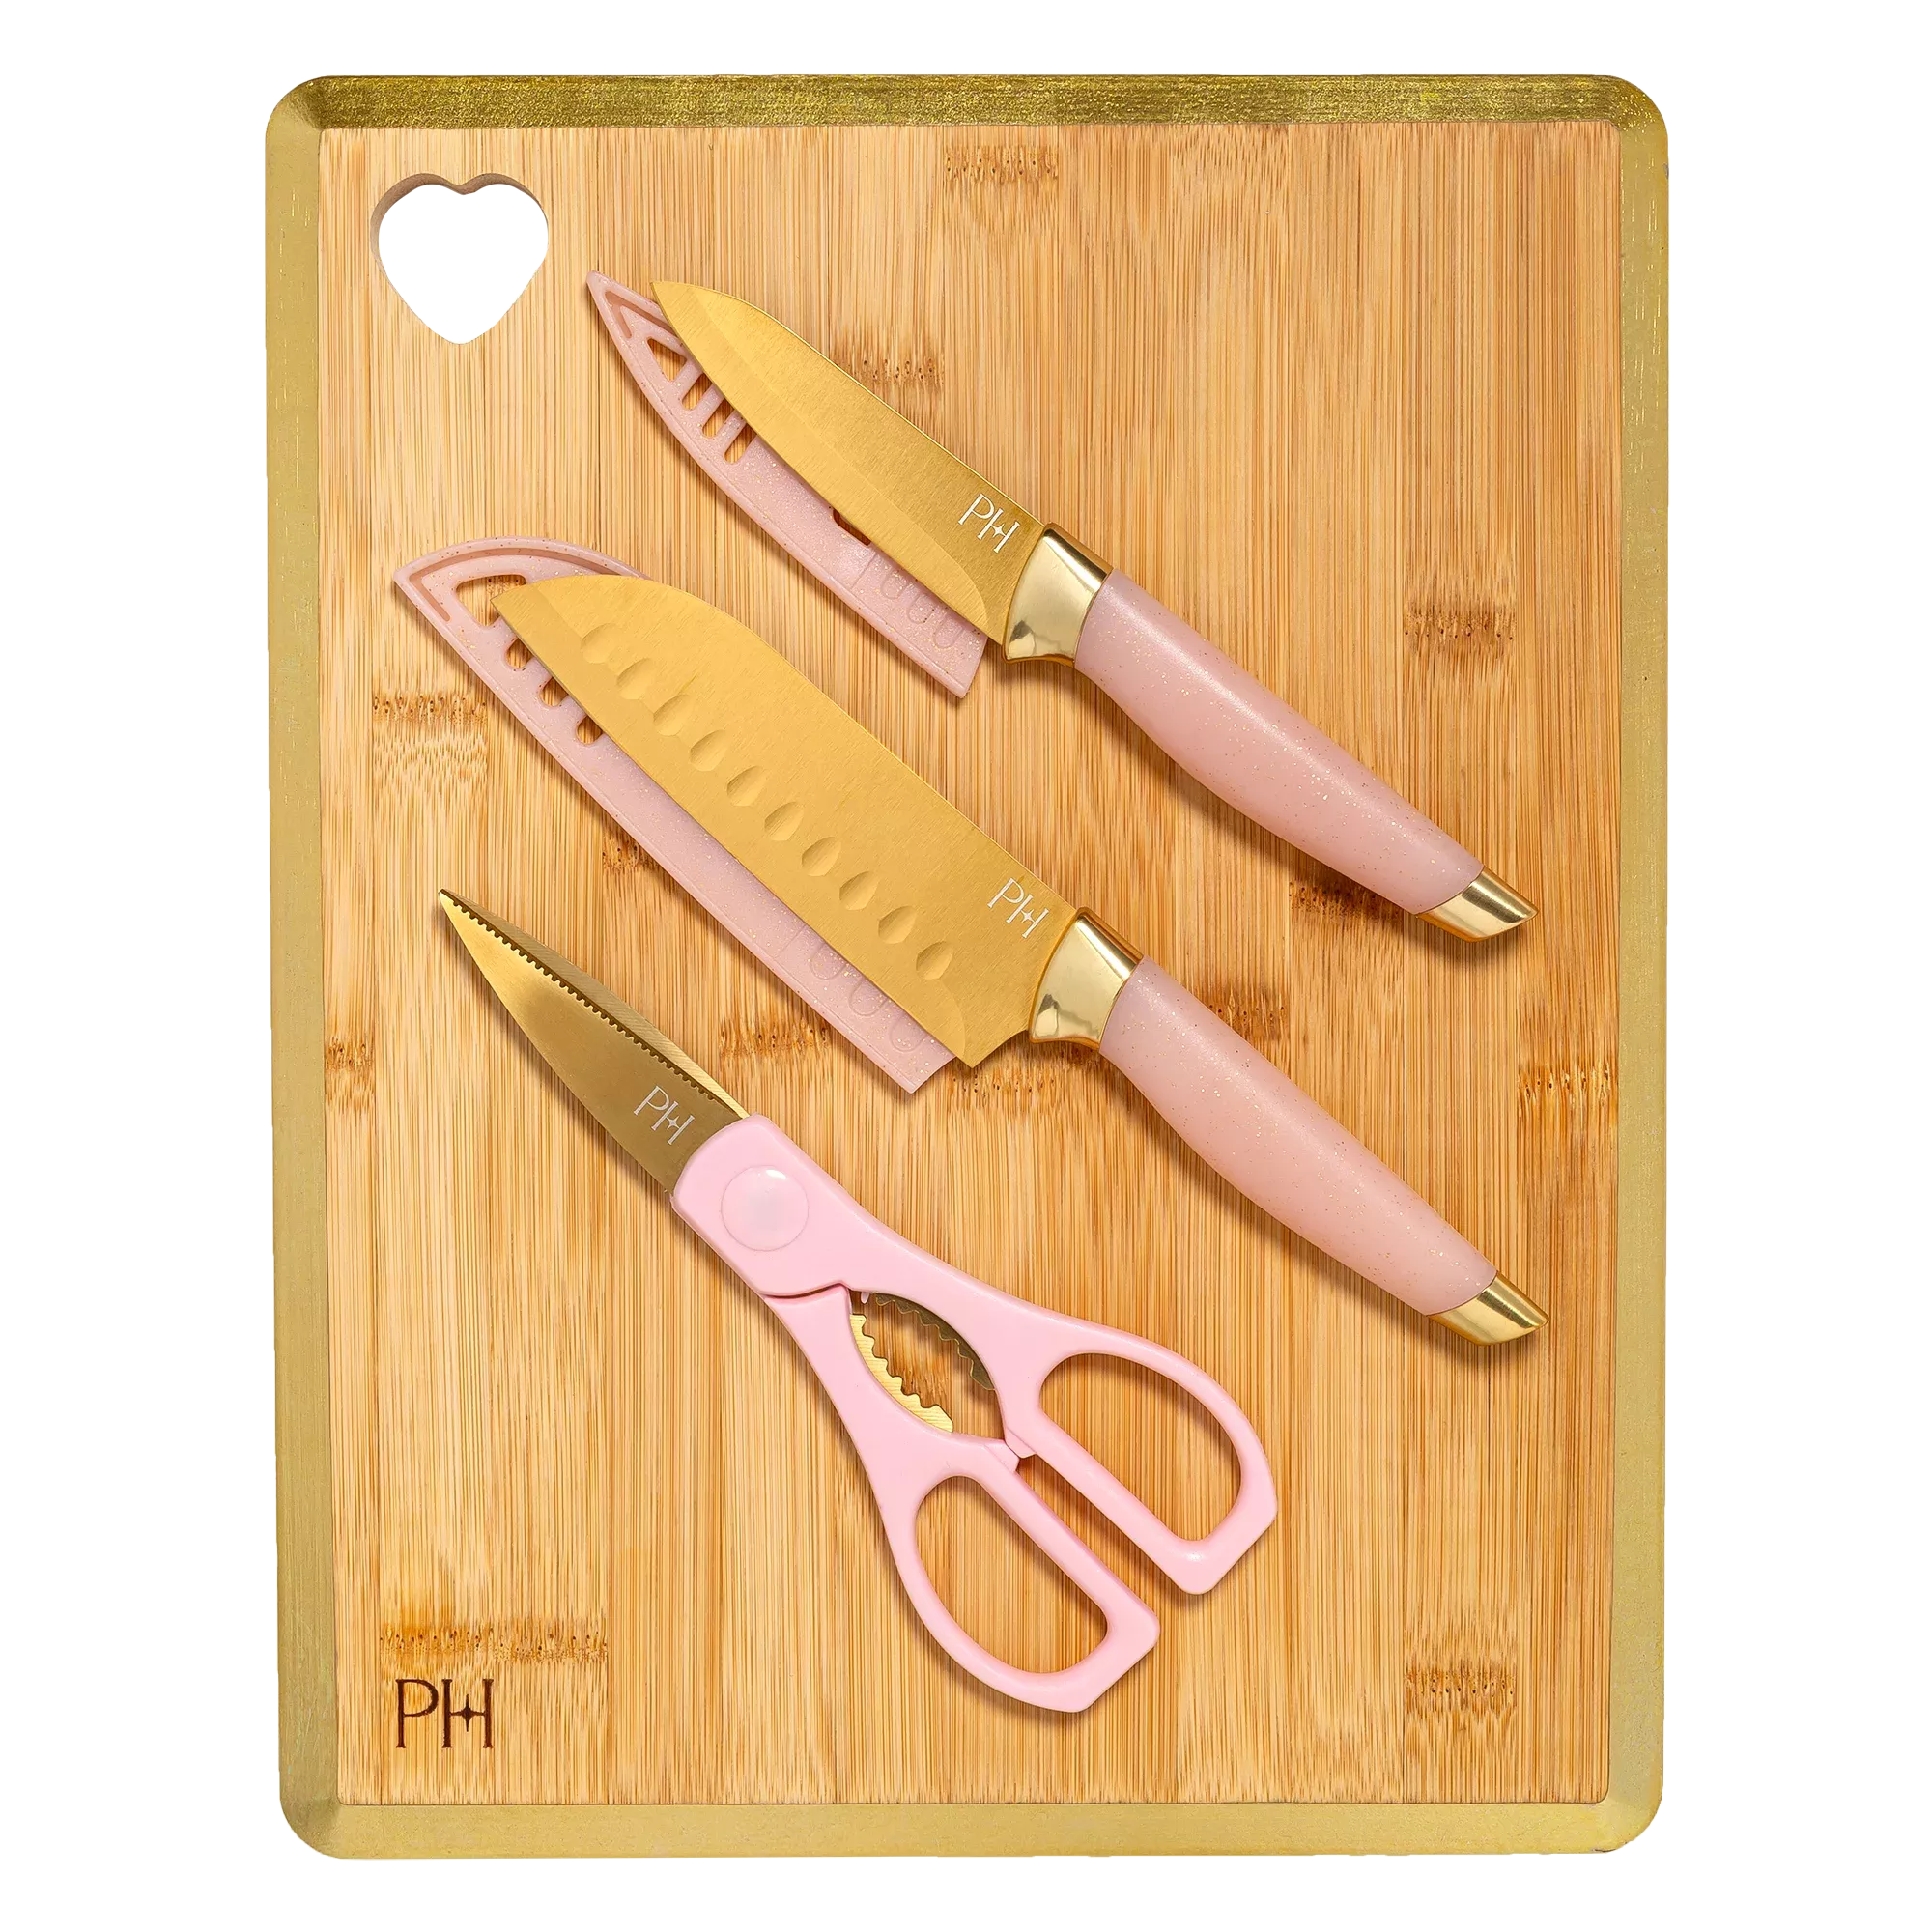 Paris Hilton 4-Piece Cheese Board Set with Large Heart-Shaped, Reversible  Bamboo Cutting Board, Pink